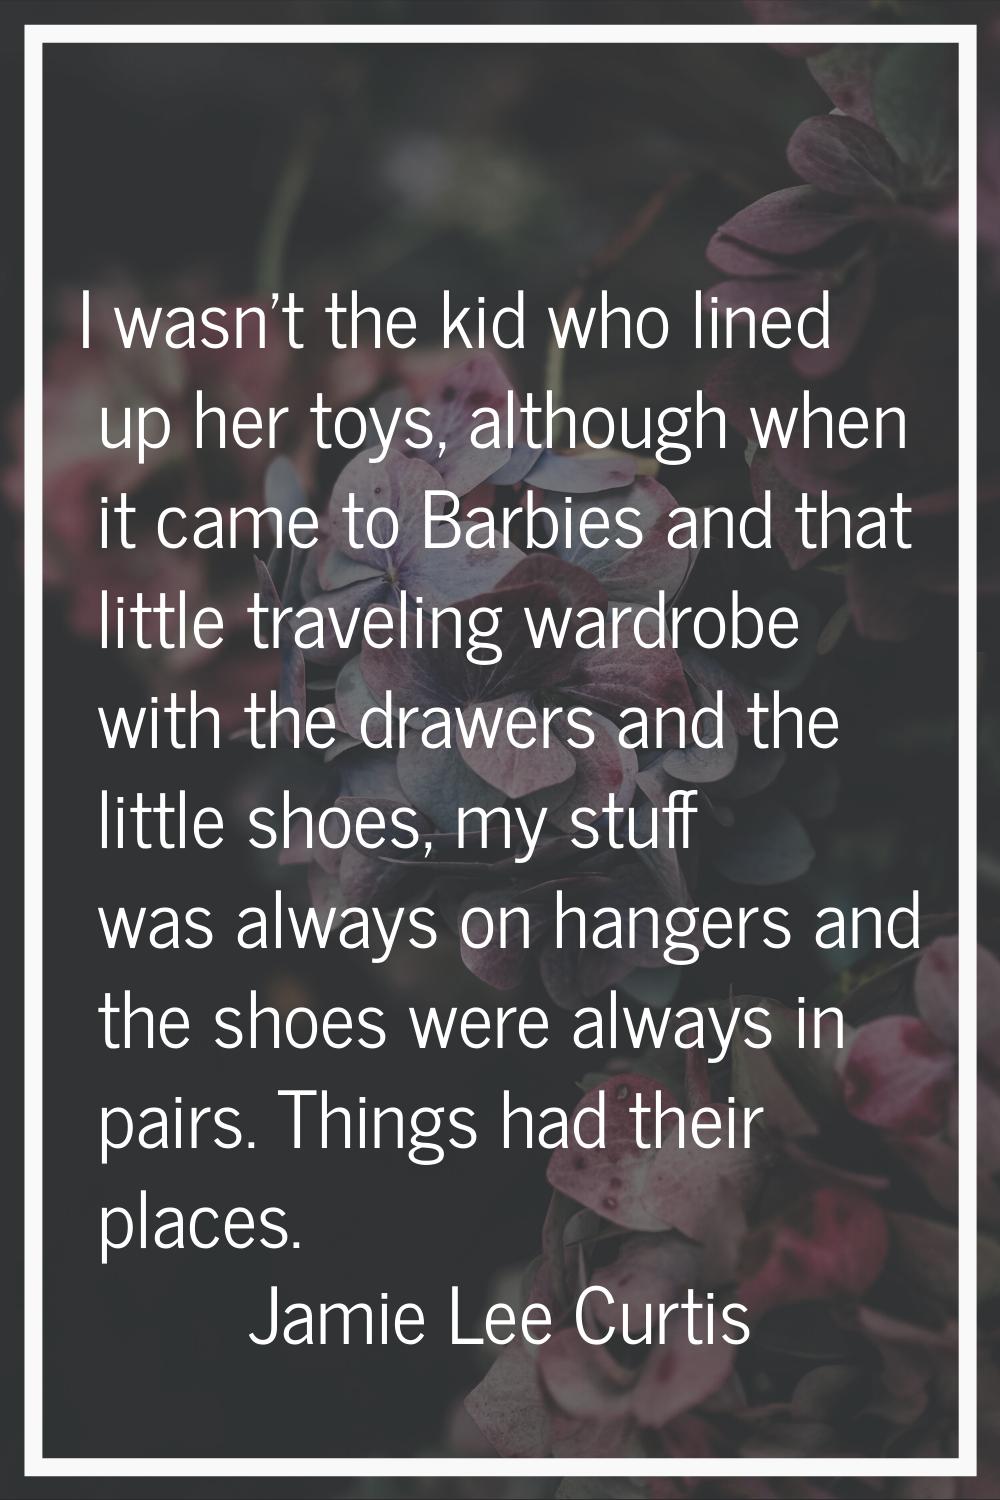 I wasn't the kid who lined up her toys, although when it came to Barbies and that little traveling 